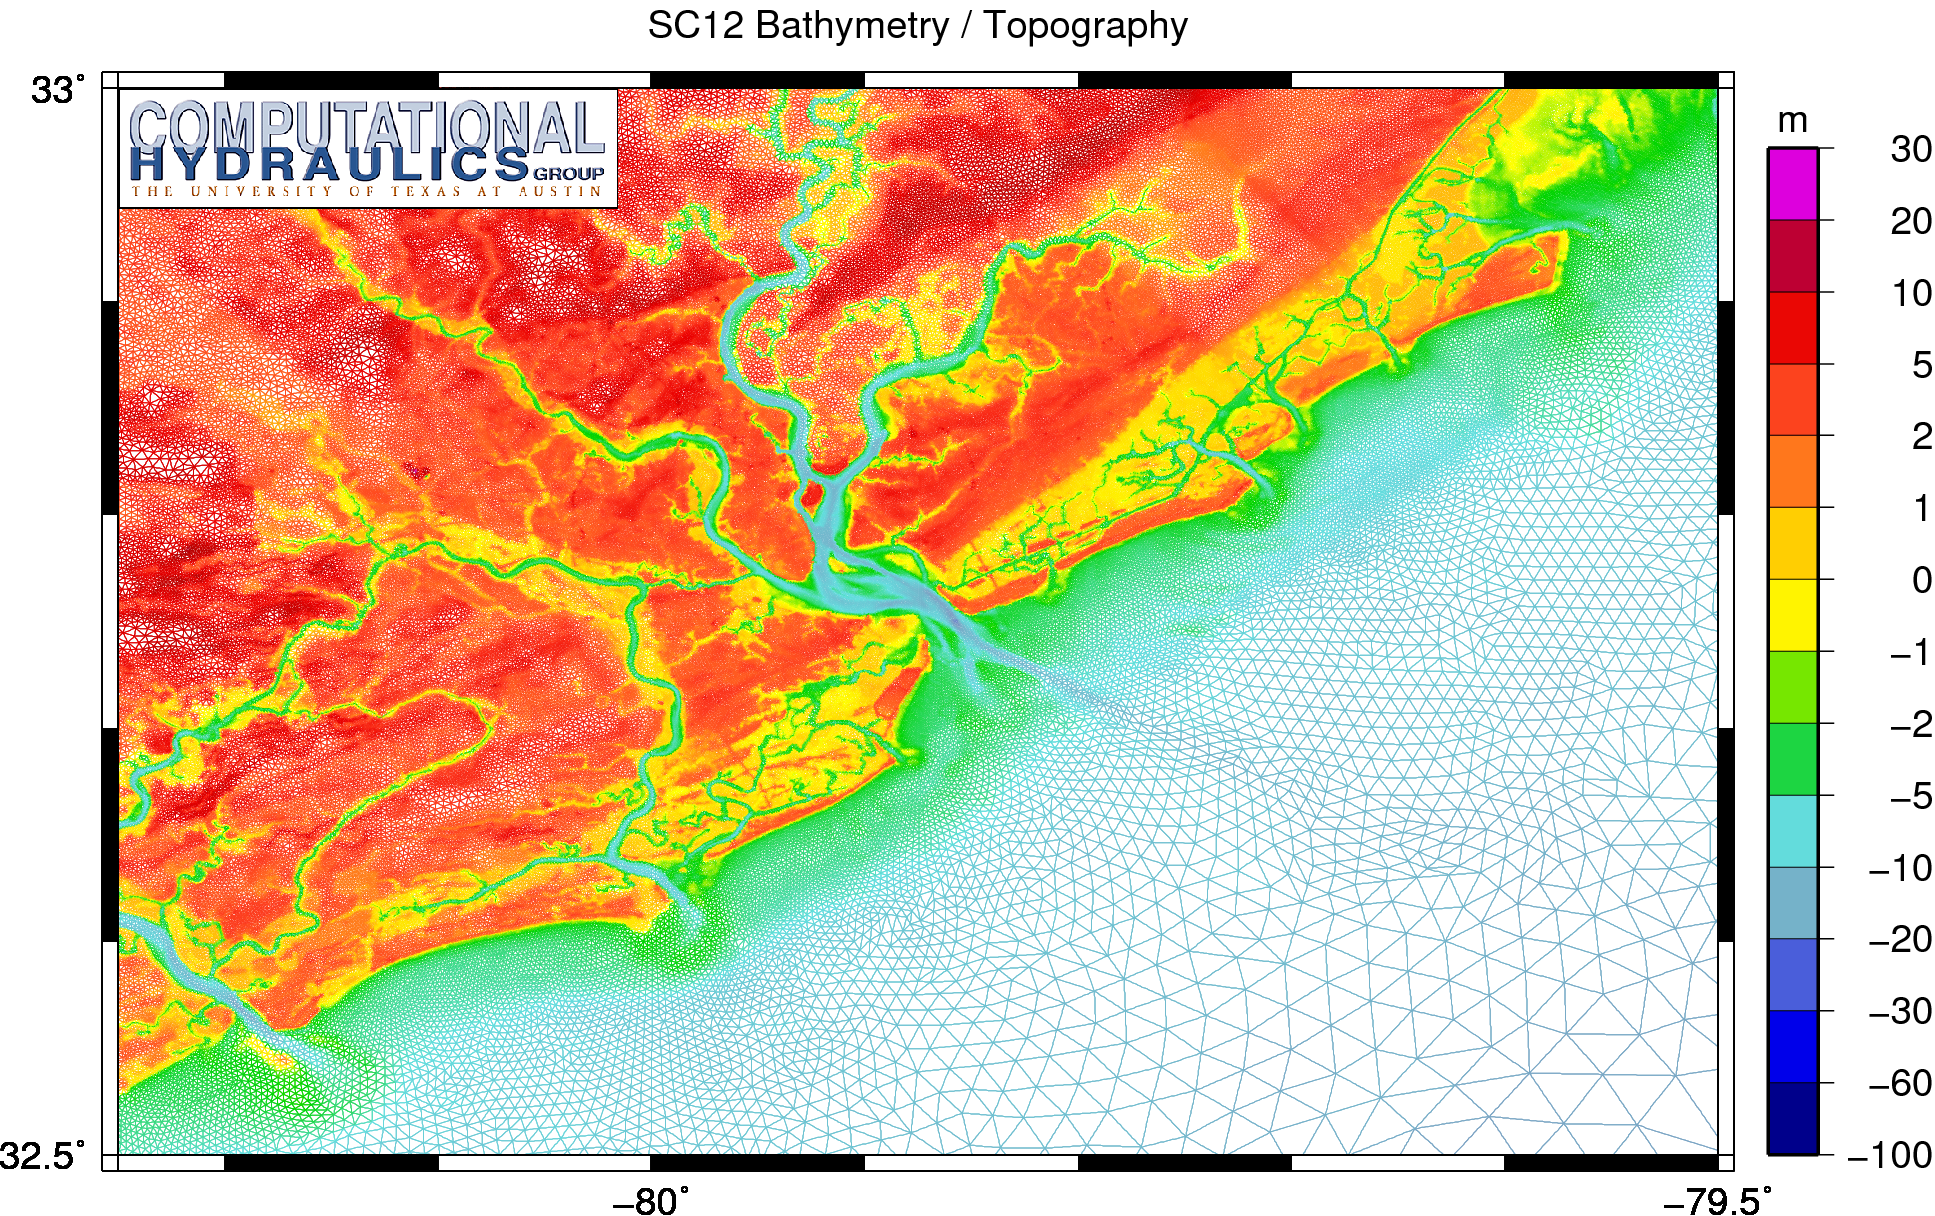 Bathymetry and topography (m) on the SC12 mesh in the region near Charleston, South Carolina.